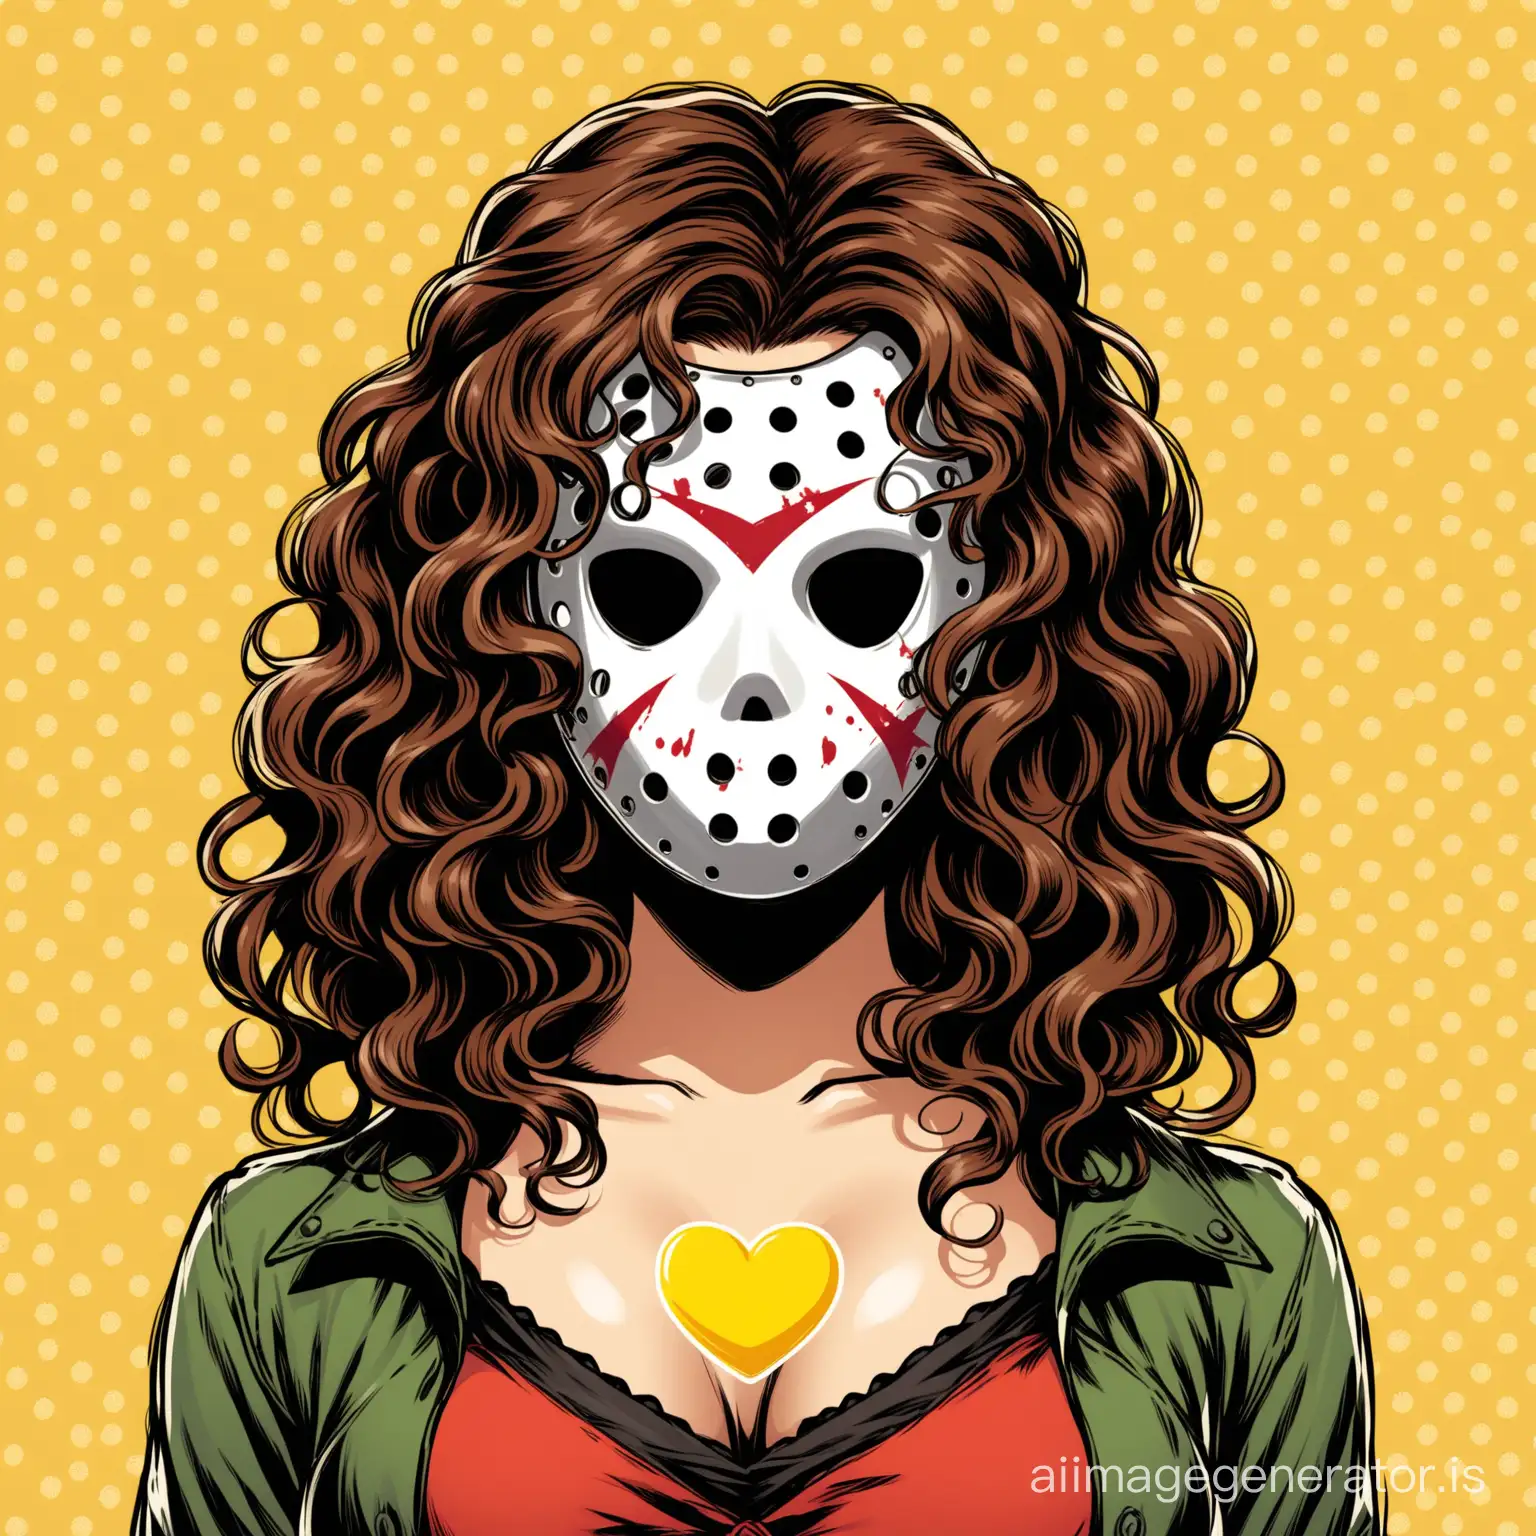 CurlHaired-Woman-in-Jason-Voorhees-Mask-against-Vibrant-Yellow-Background